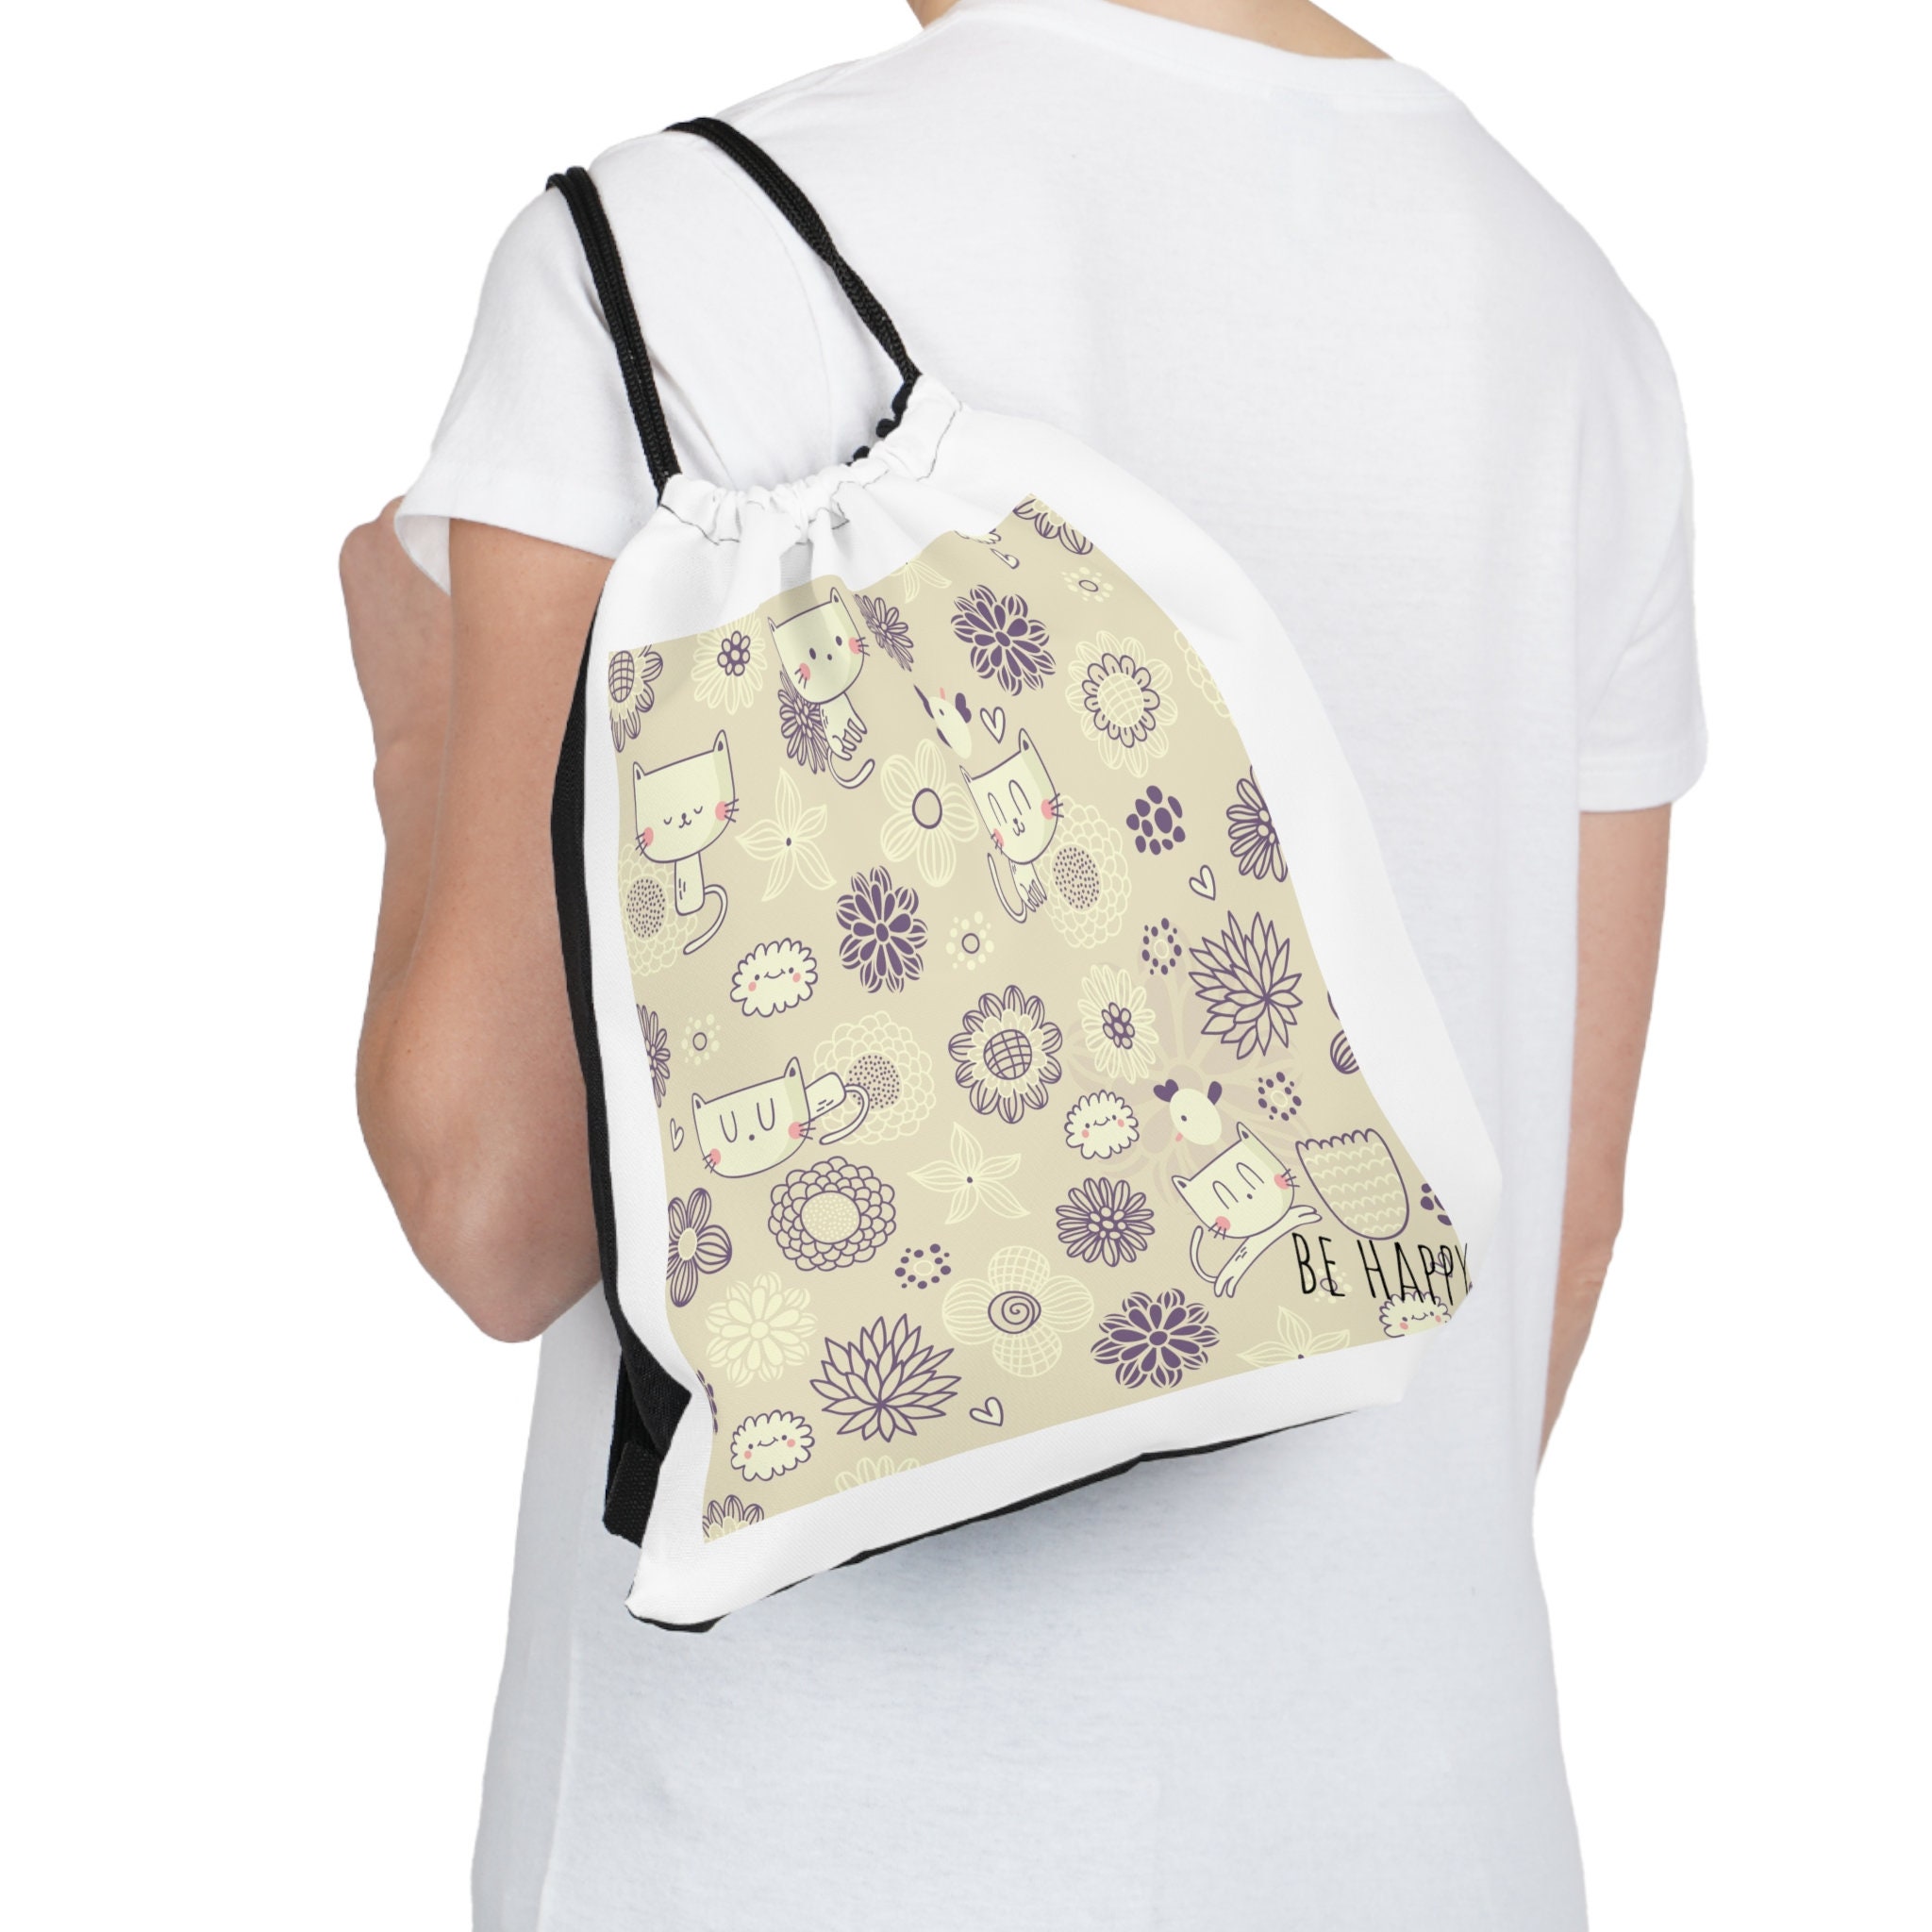 Discover Cheerful Feline Friends Design Outdoor Drawstring Bag